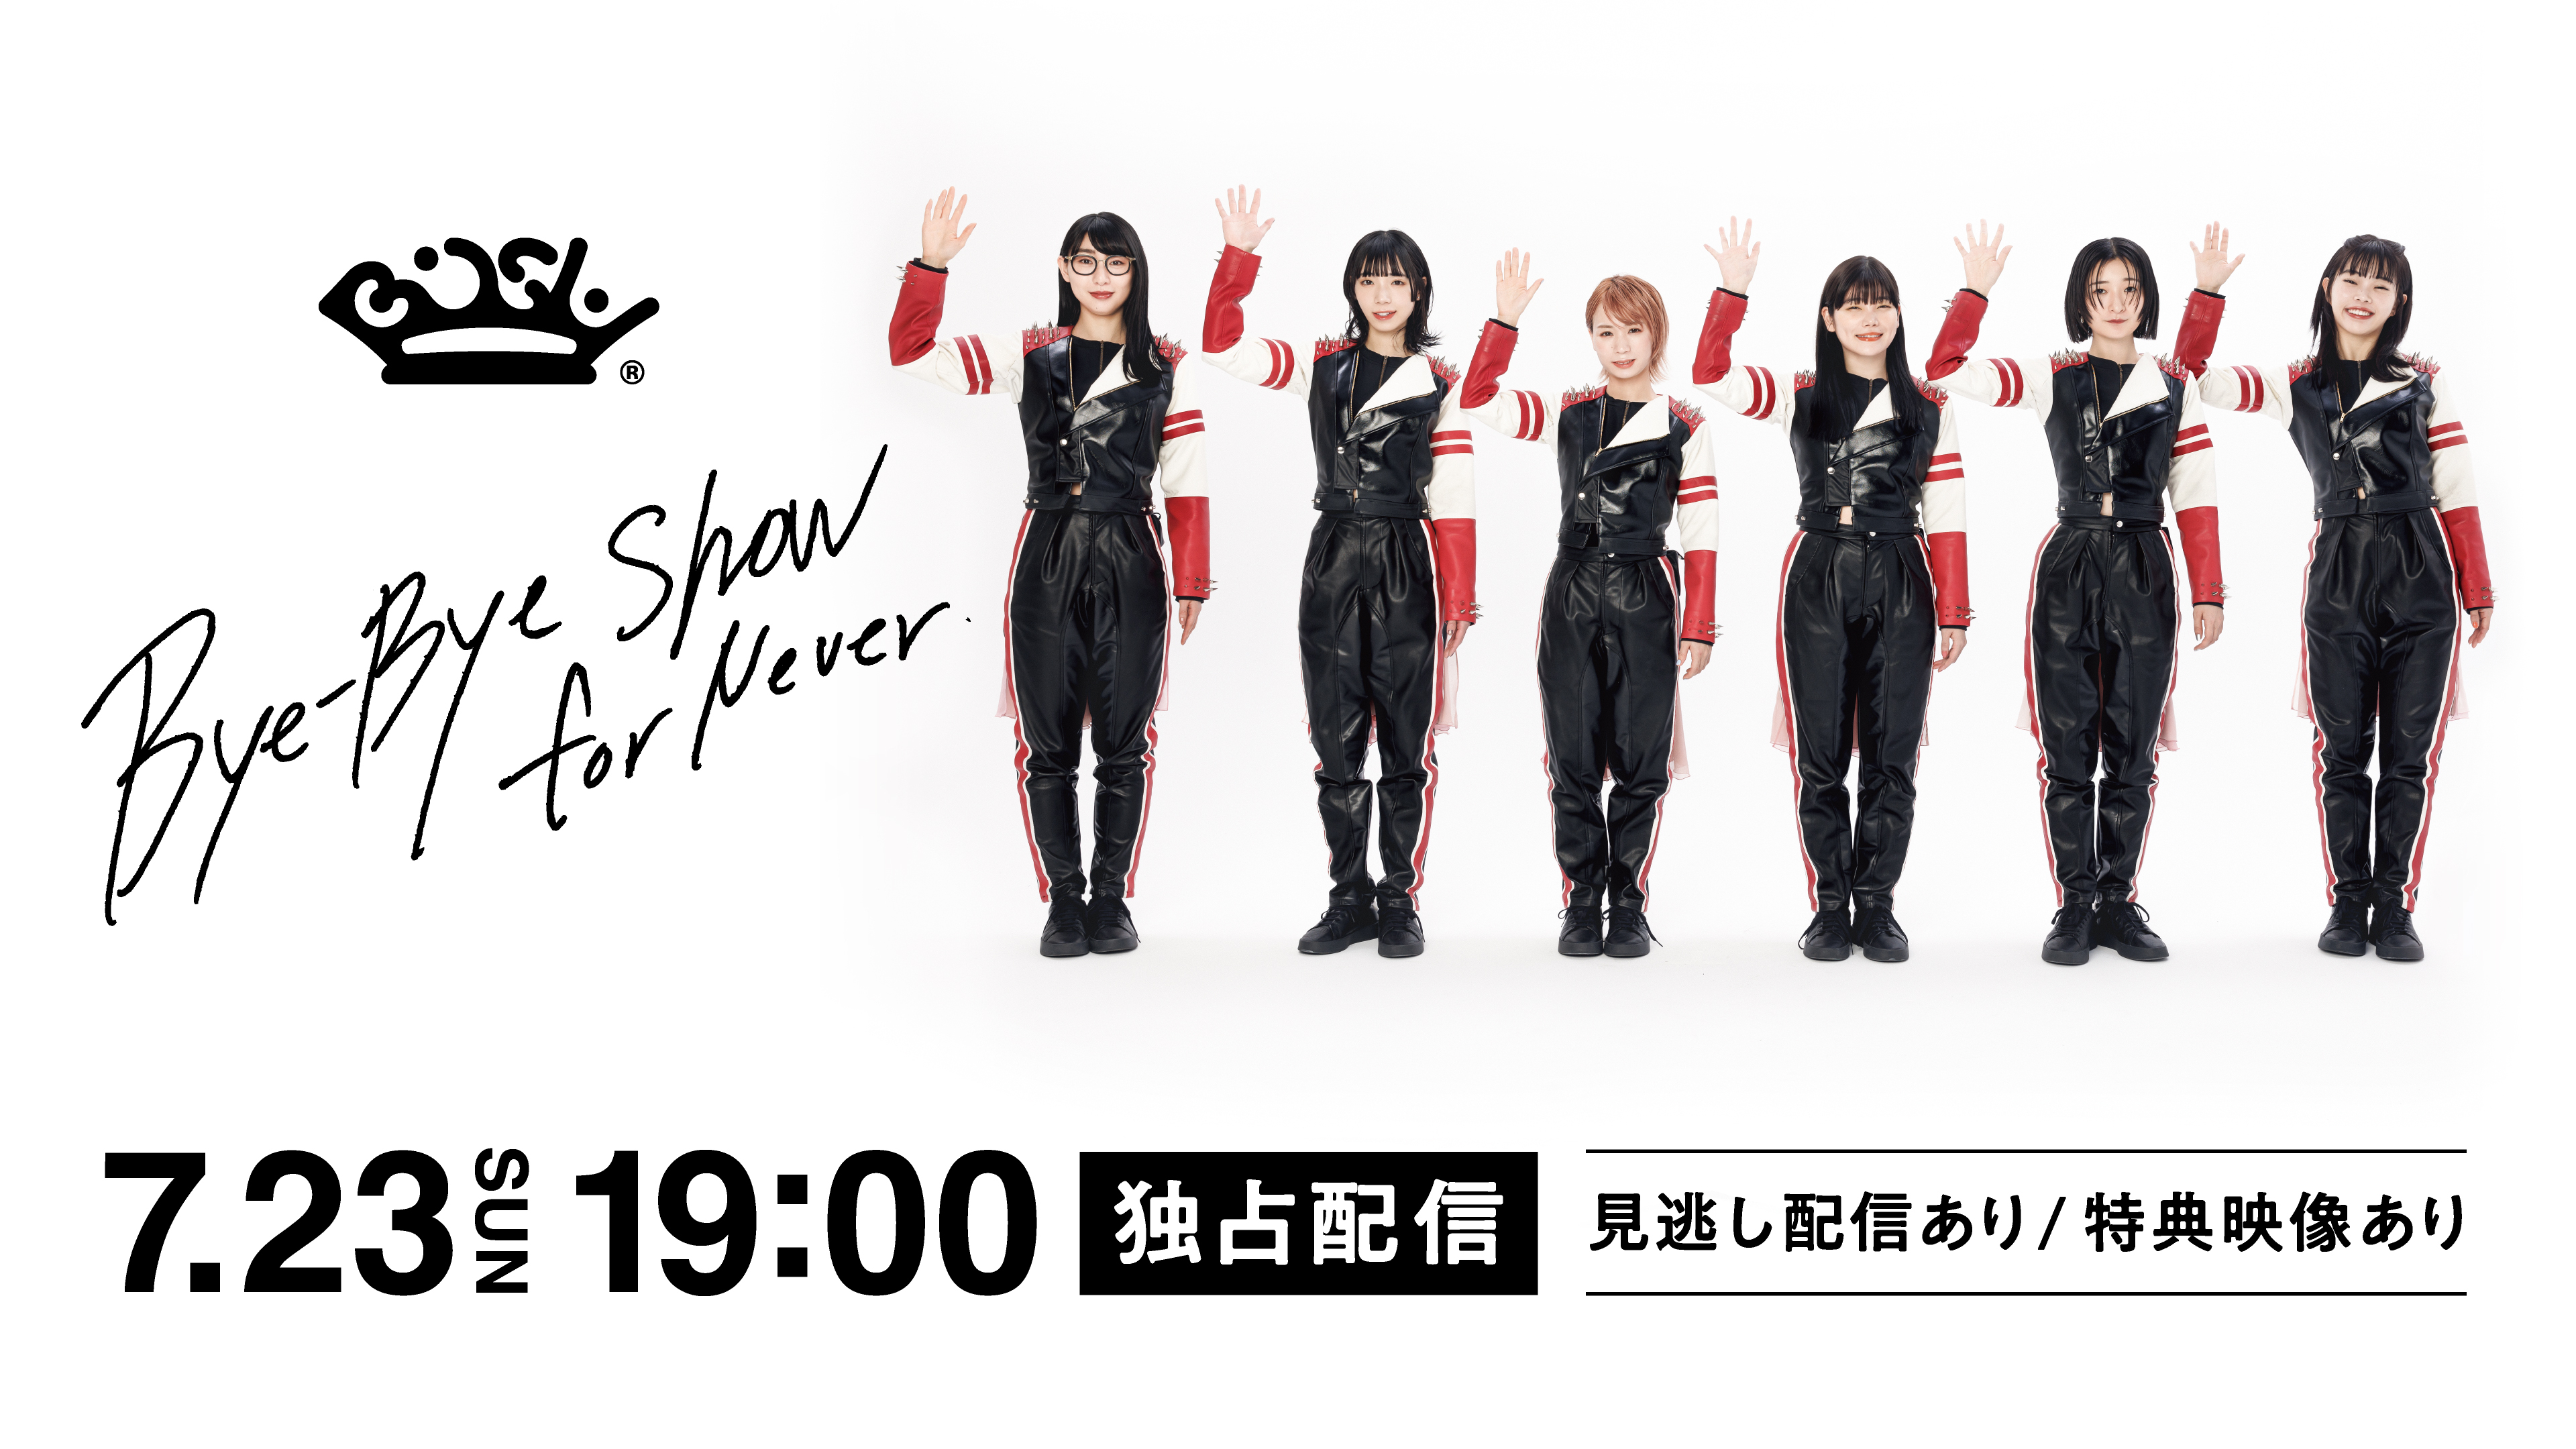 BiSH「Bye-Bye Show for Never」